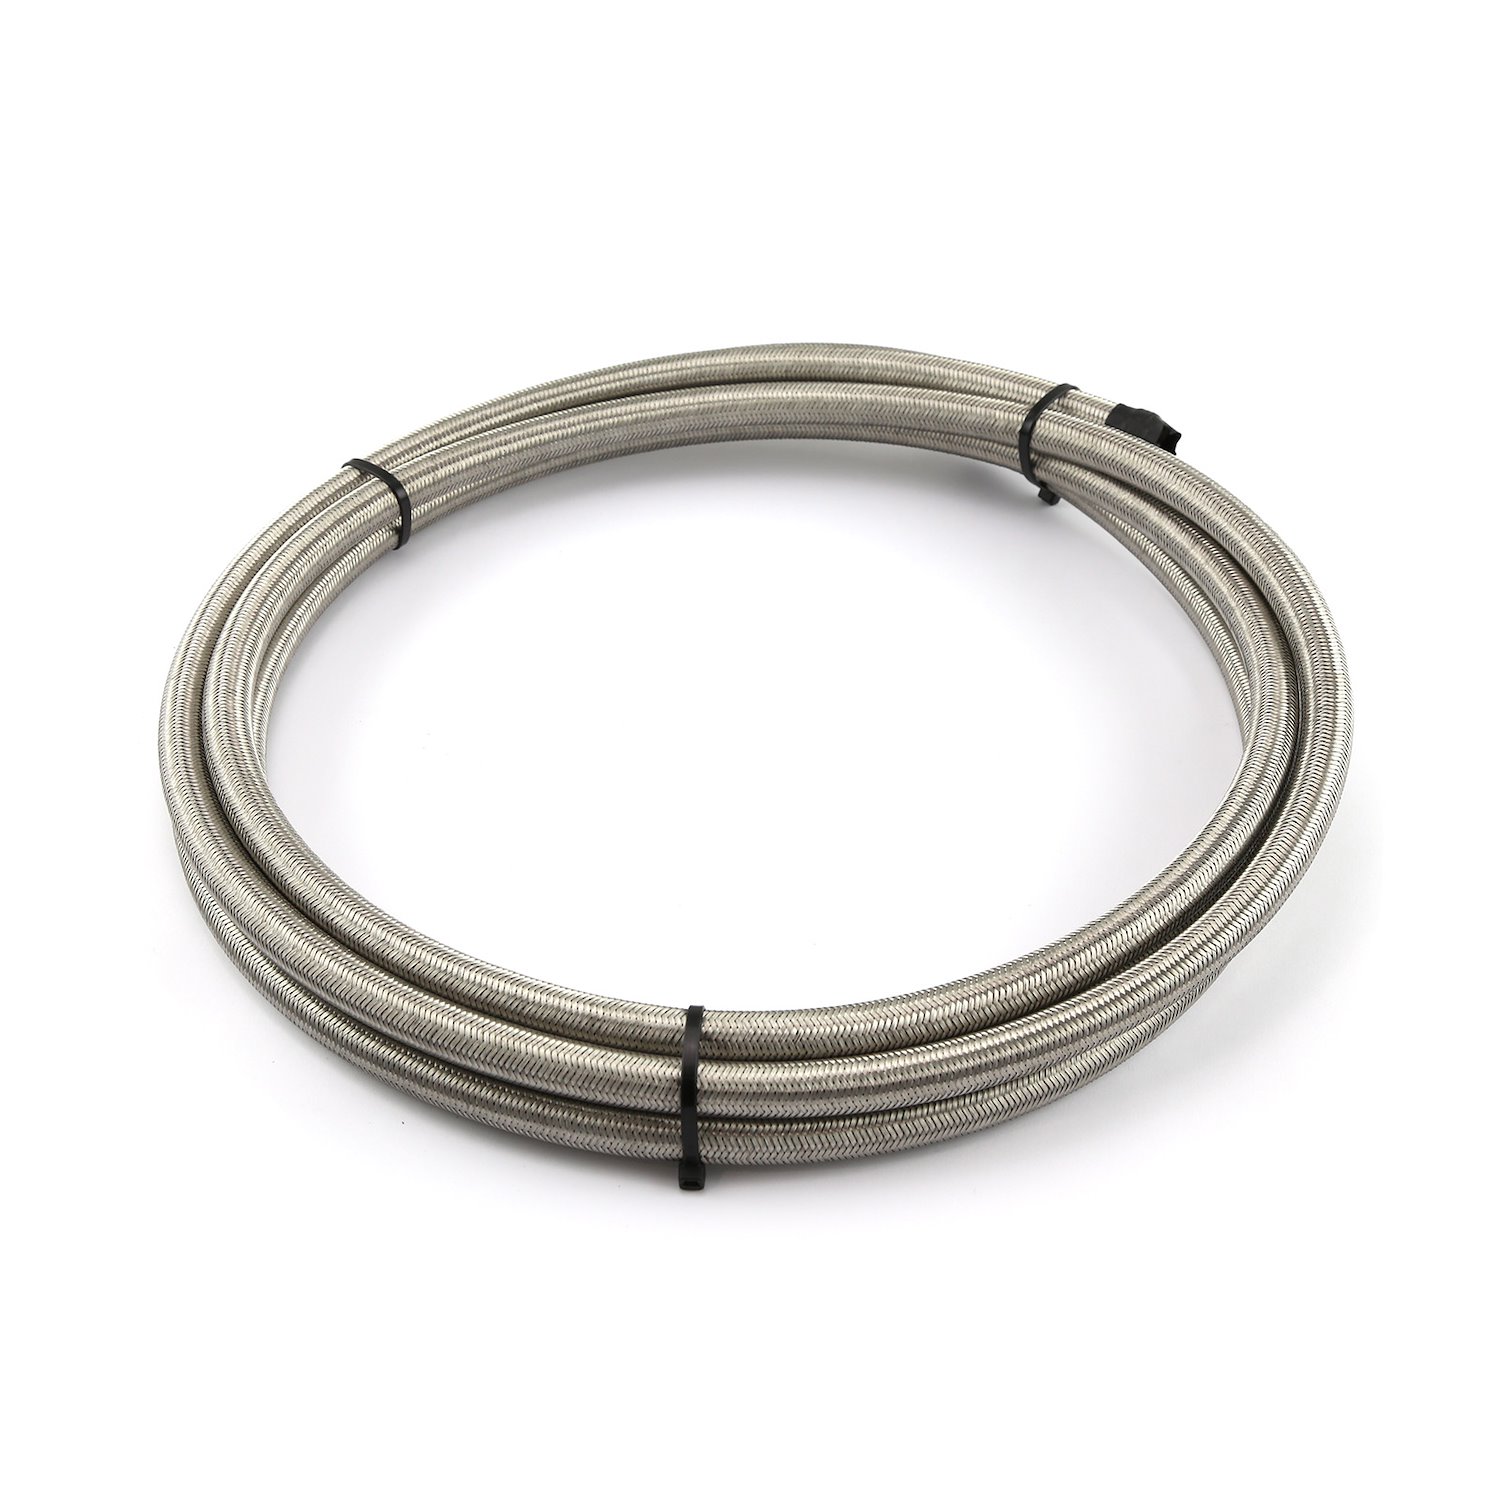 100 Series Stainless Steel Braided Hose -4 AN